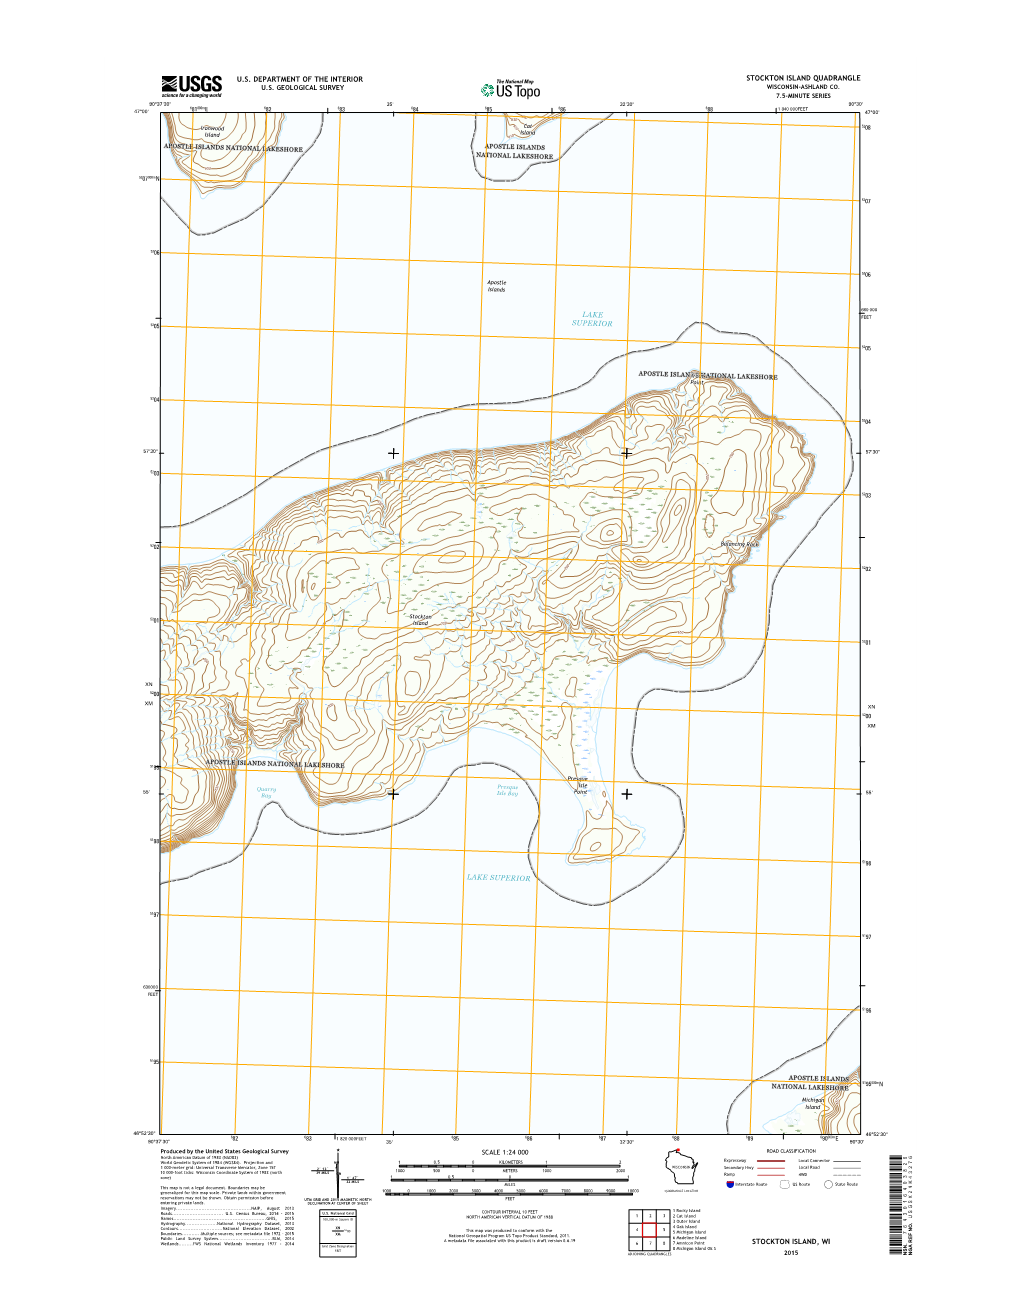 USGS 7.5-Minute Image Map for Stockton Island, Wisconsin